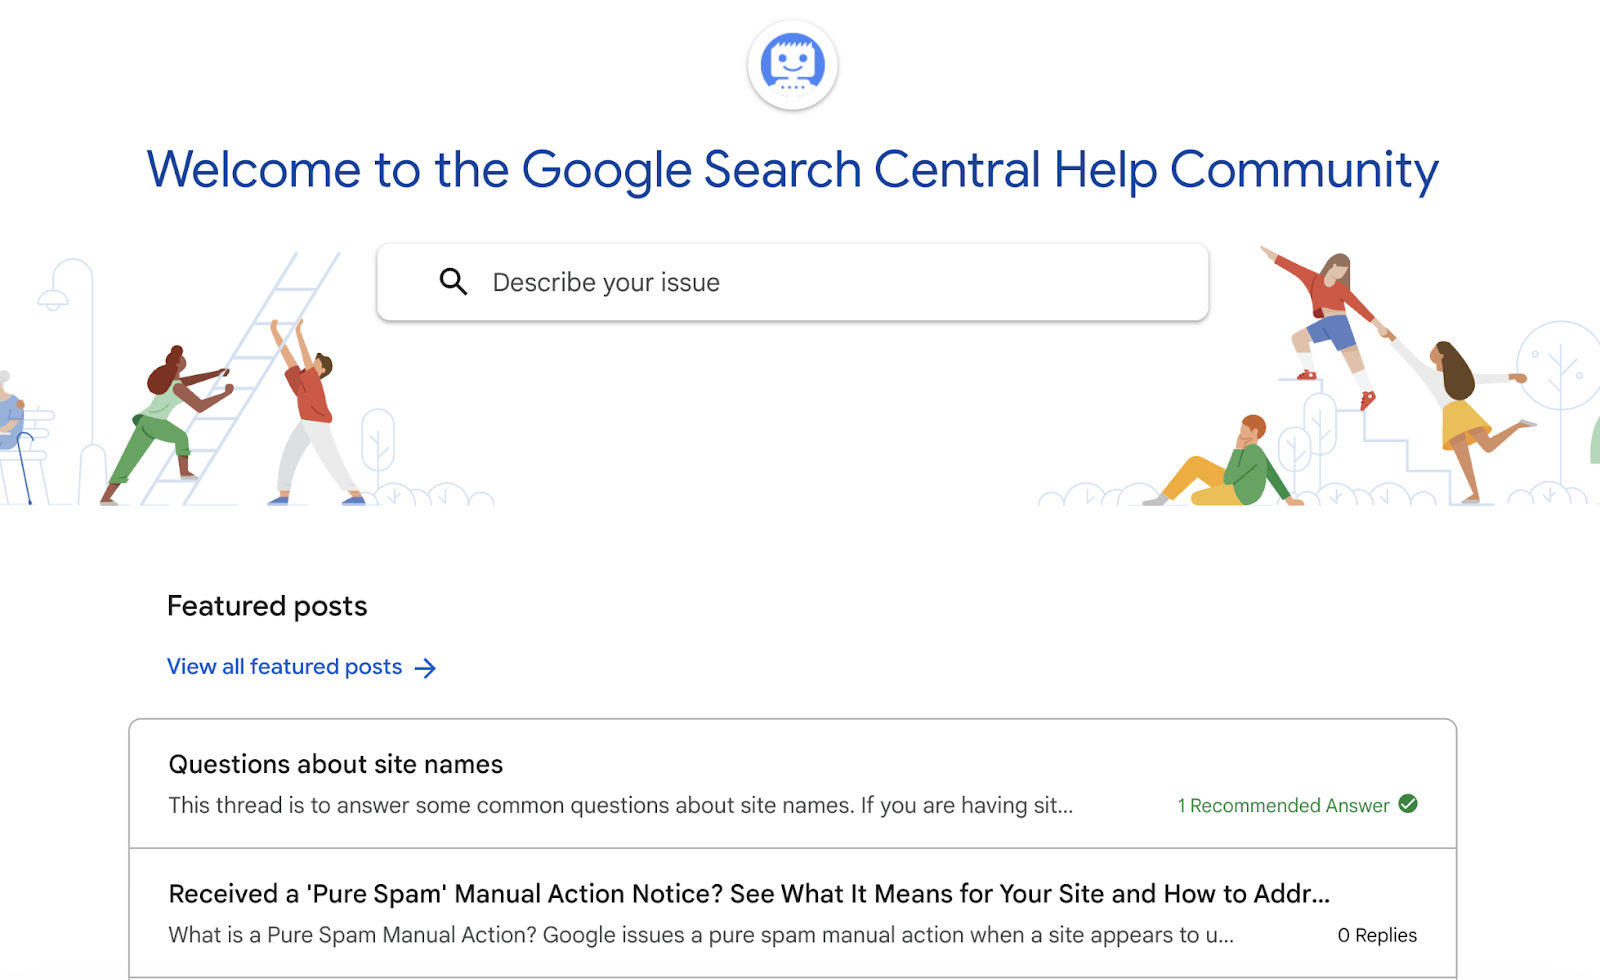 Google Search Central Help Community homepage with hunt  barroom  and featured posts.